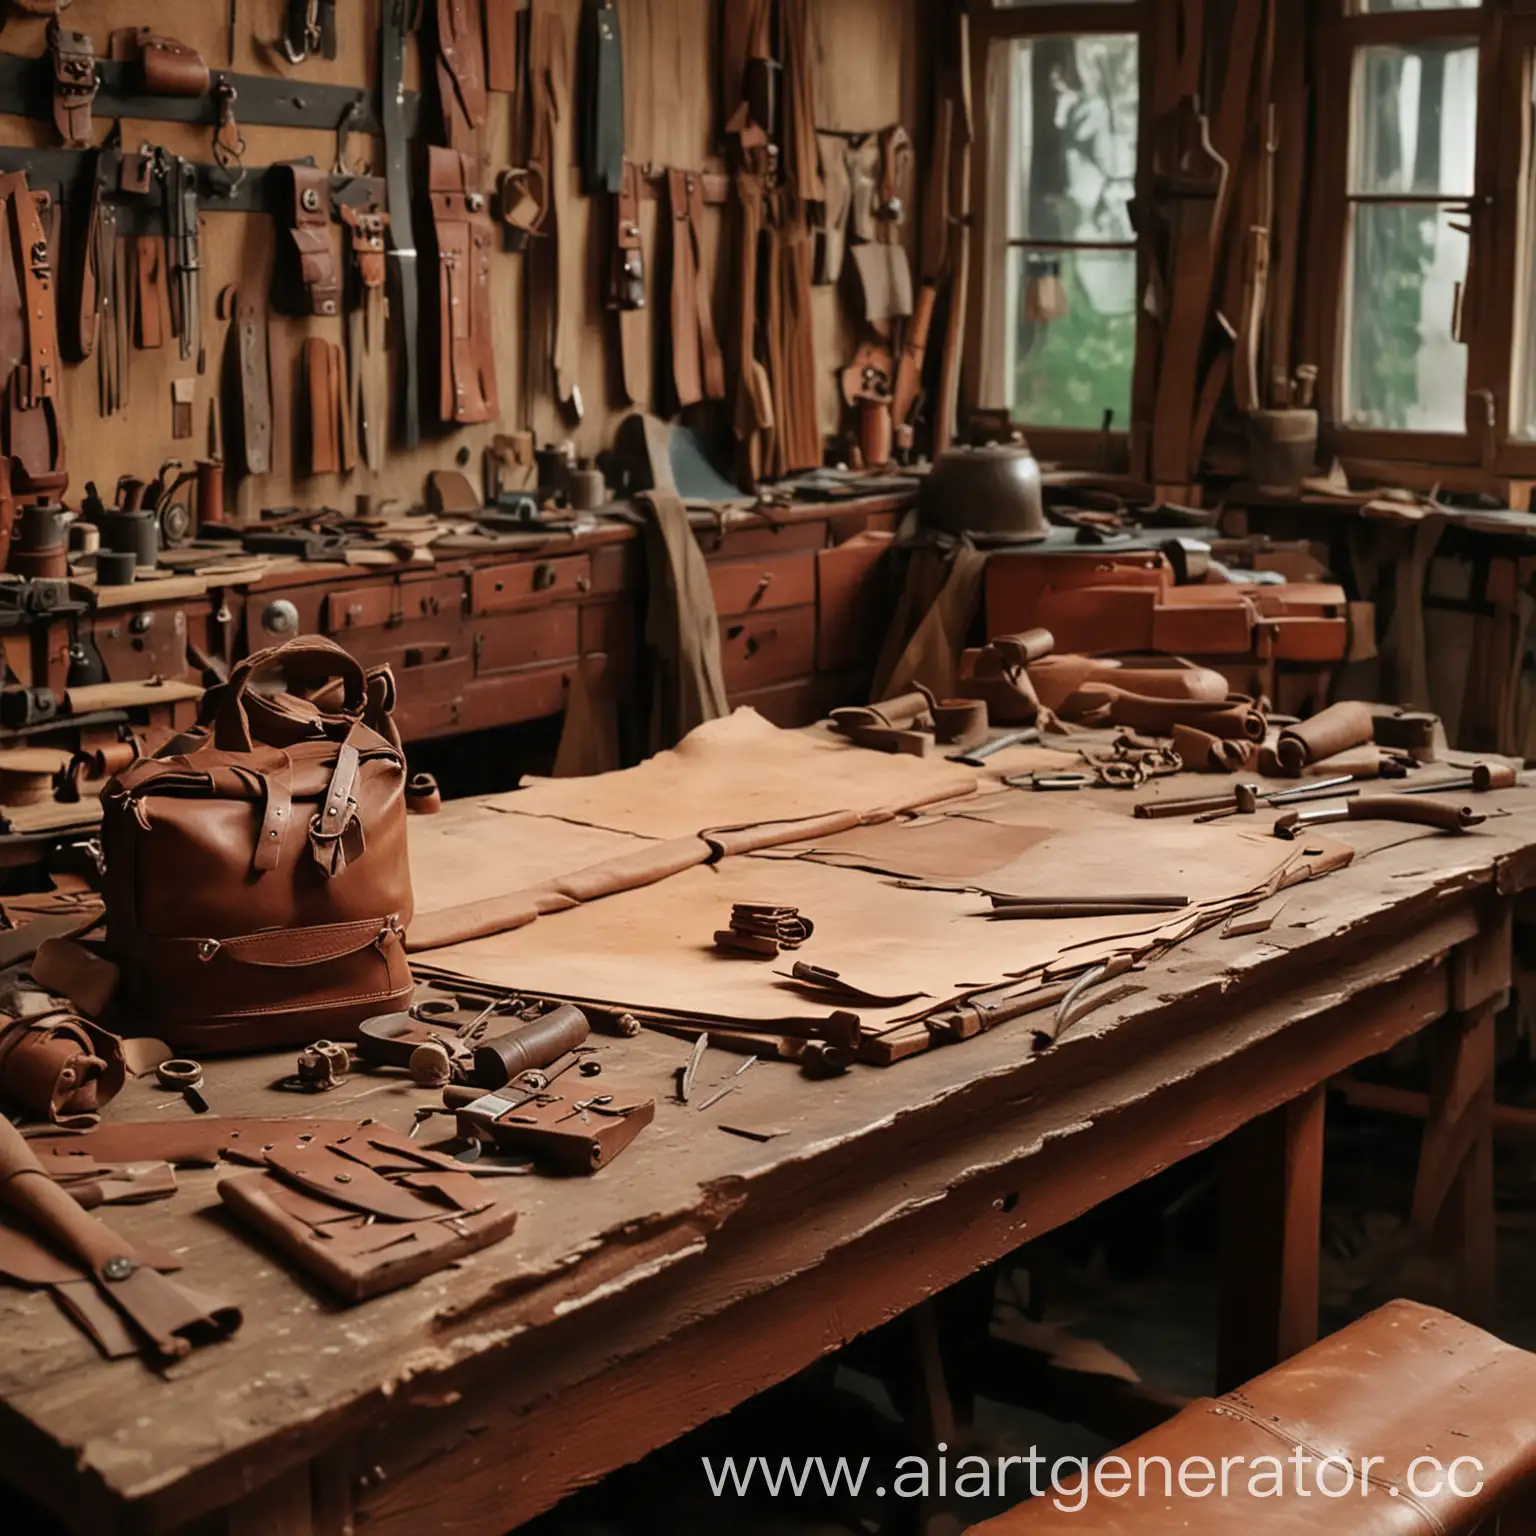 Leatherworkers-Workshop-Scene-Inspired-by-Soviet-Union-Animated-Films